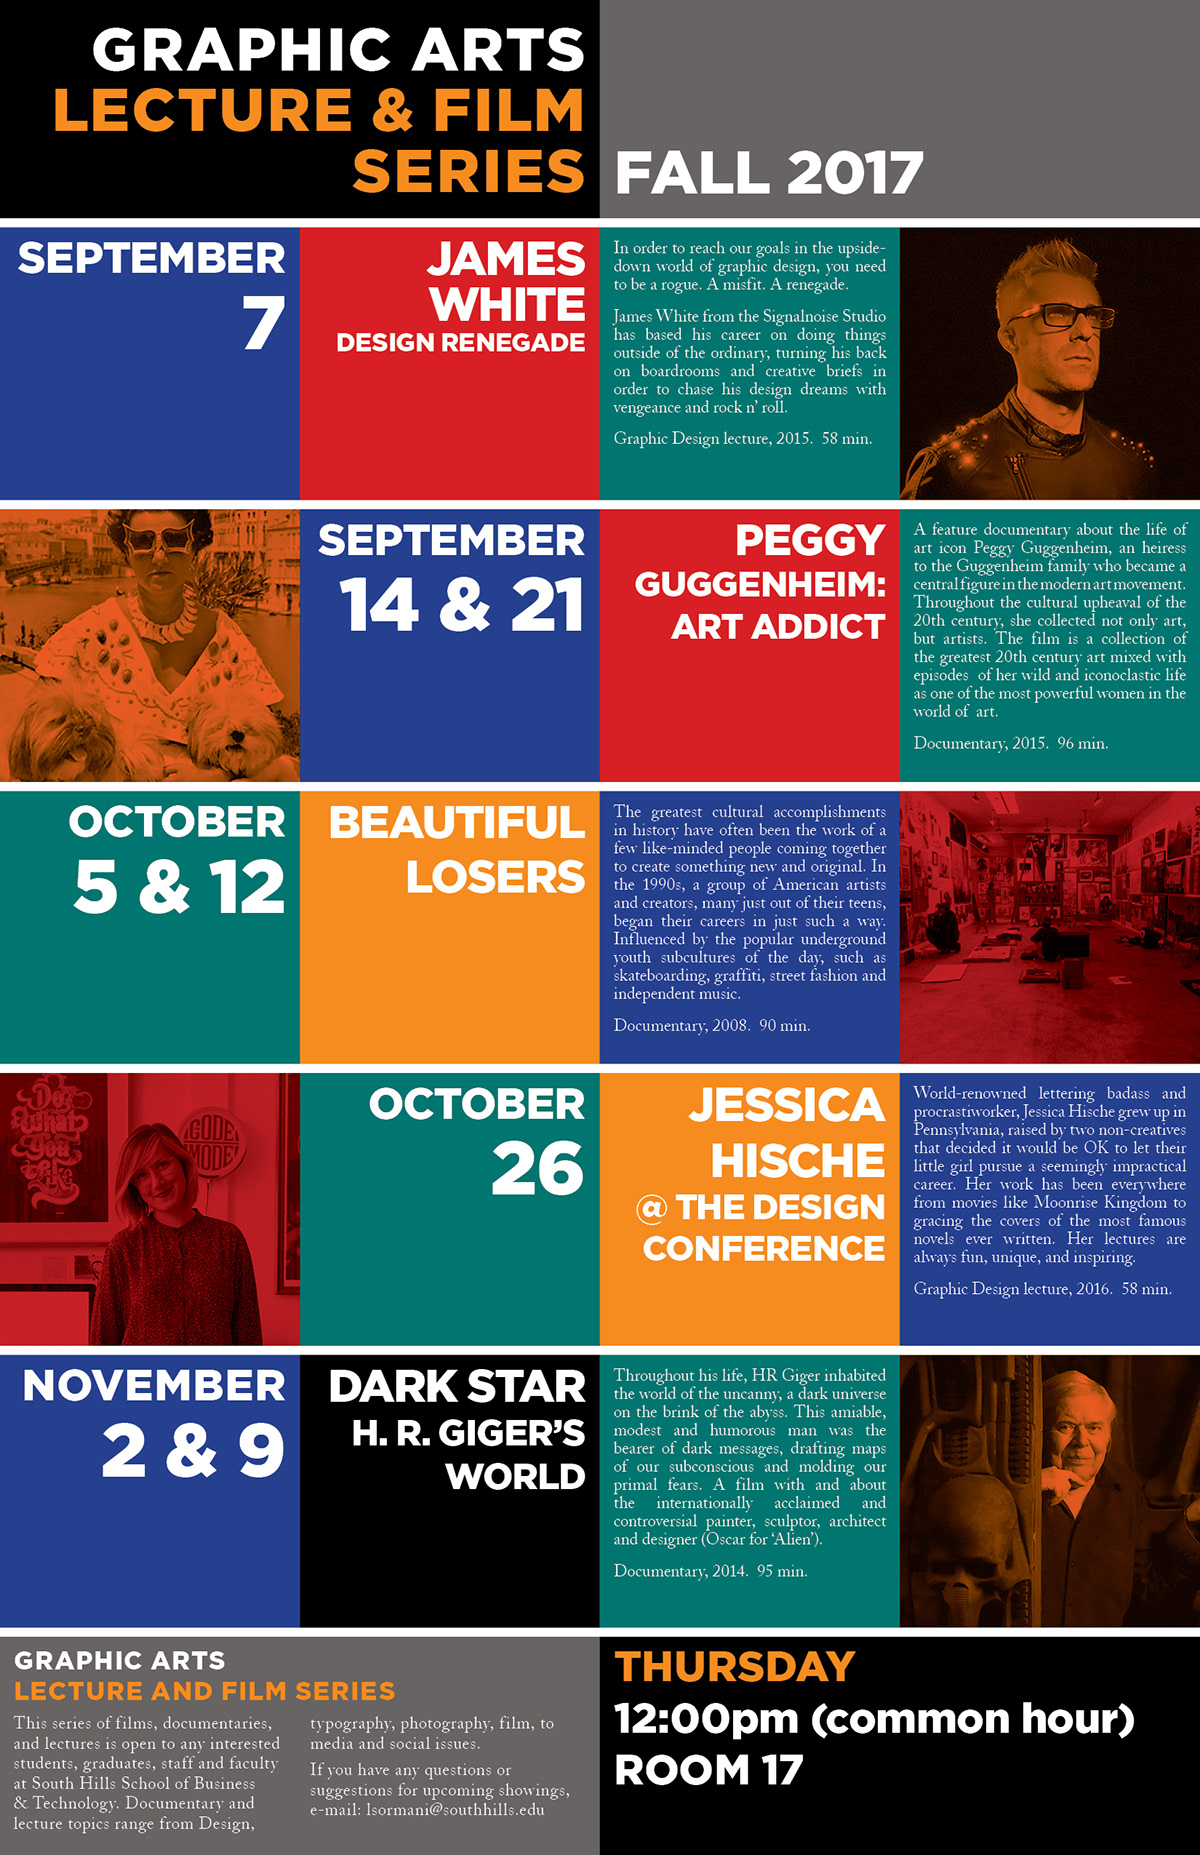 posters Promotion film series lectures graphic design 